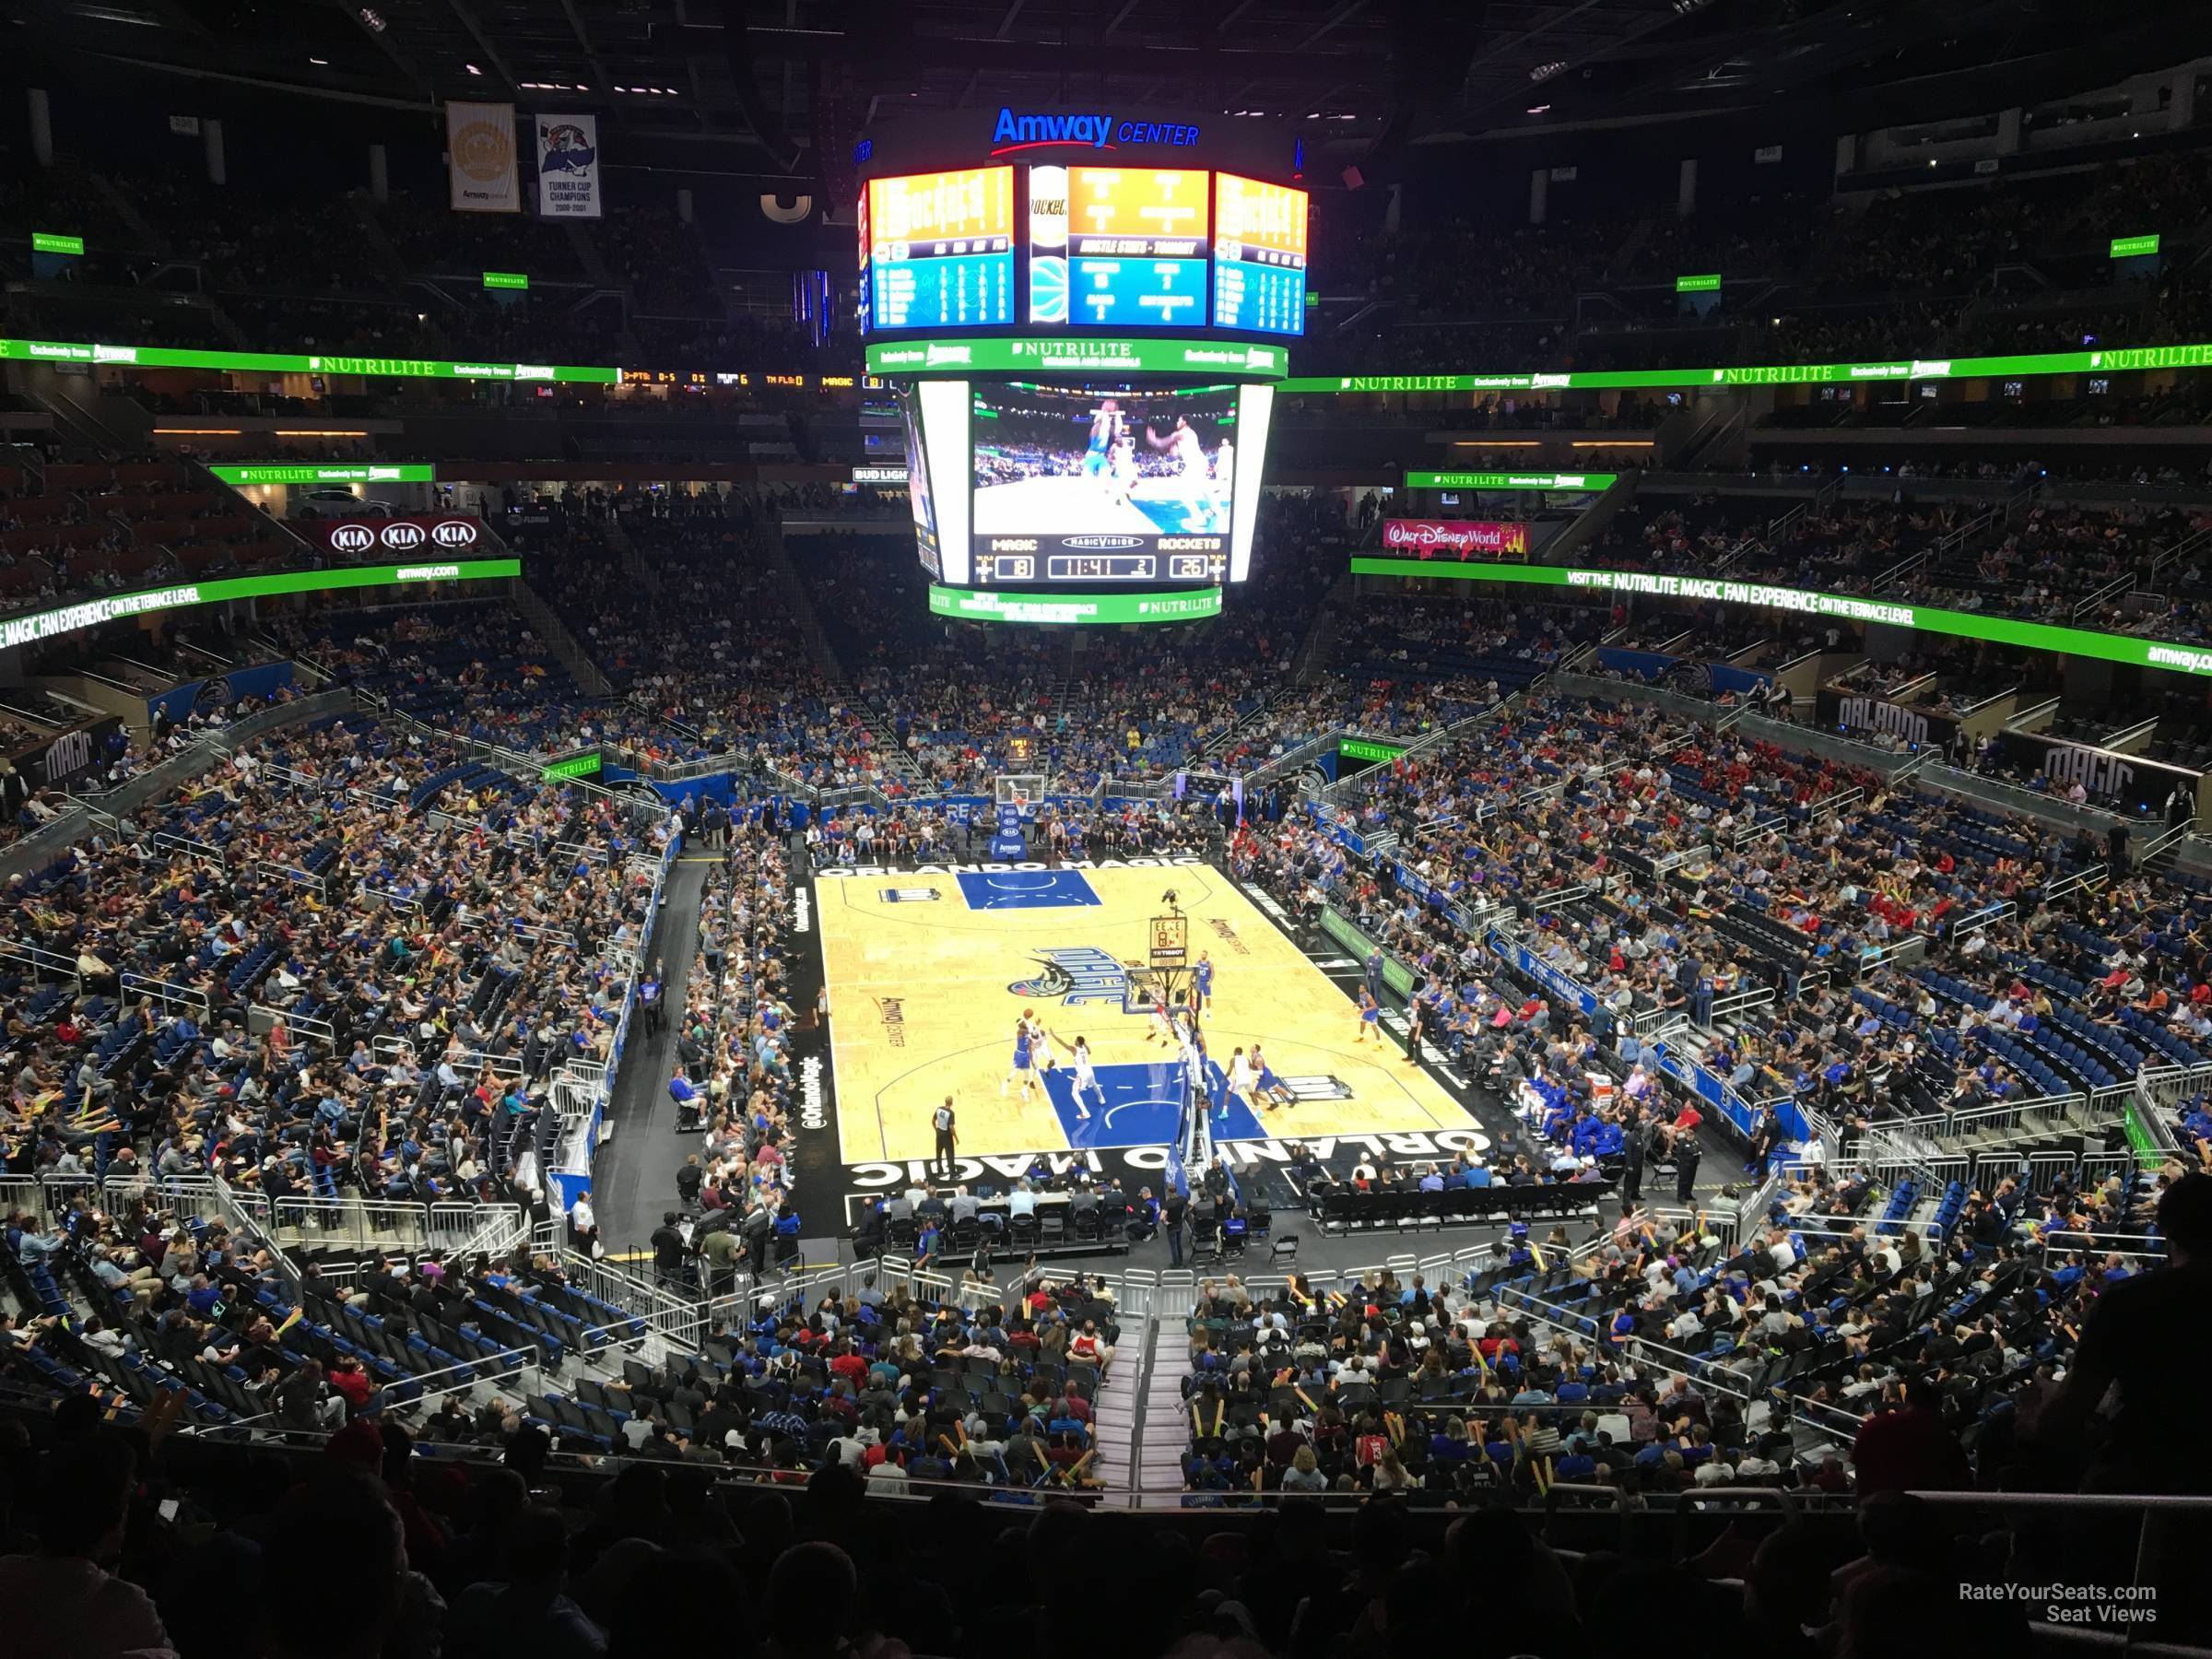 section 111a, row 28 seat view  for basketball - amway center